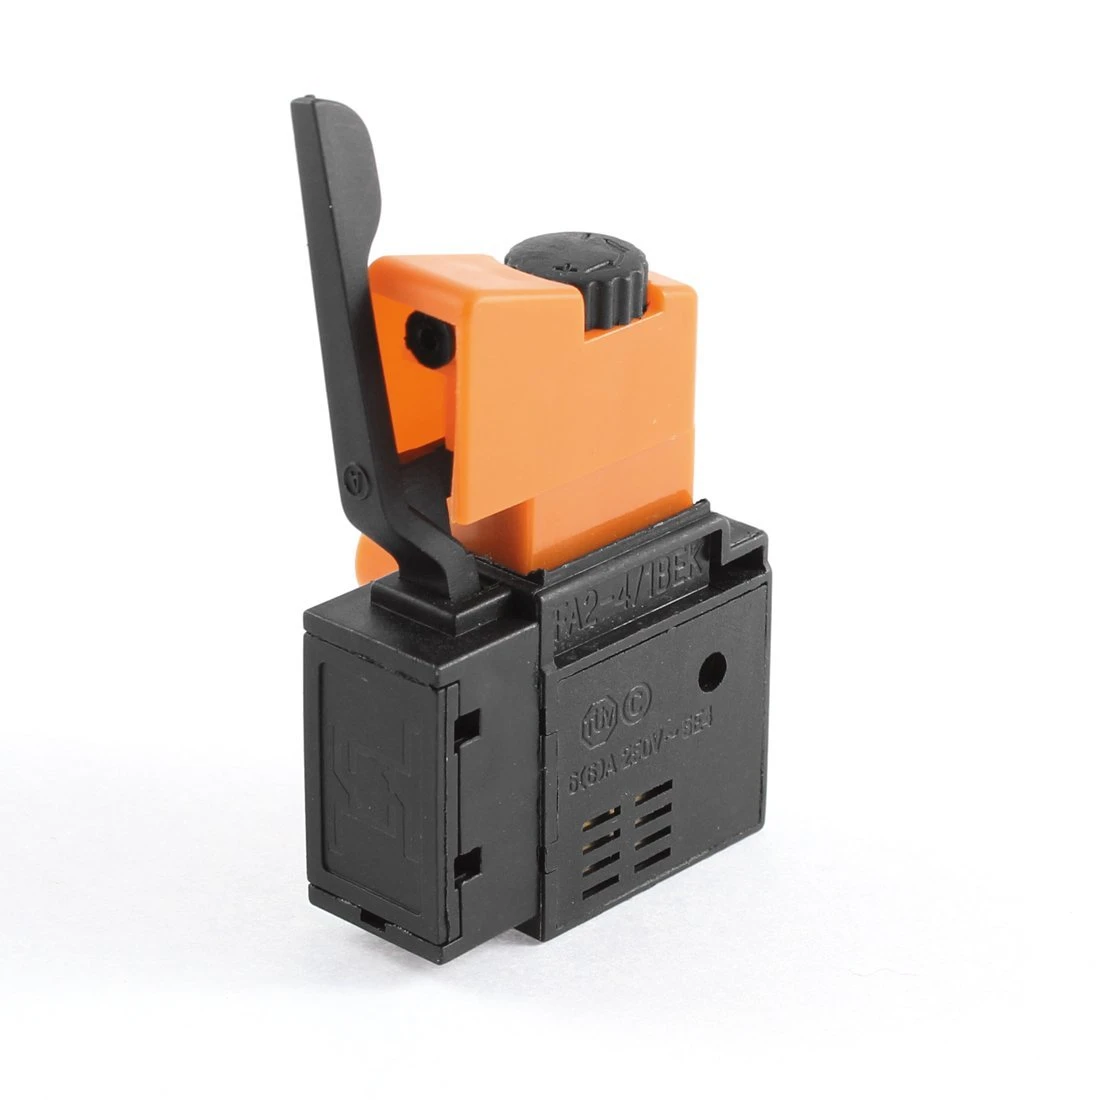 1PC AC 250V/4A FA2-4/1BEK FA2-6/1BEK Adjustable Speed Switch For Electric Drill Trigger Switches High Quality